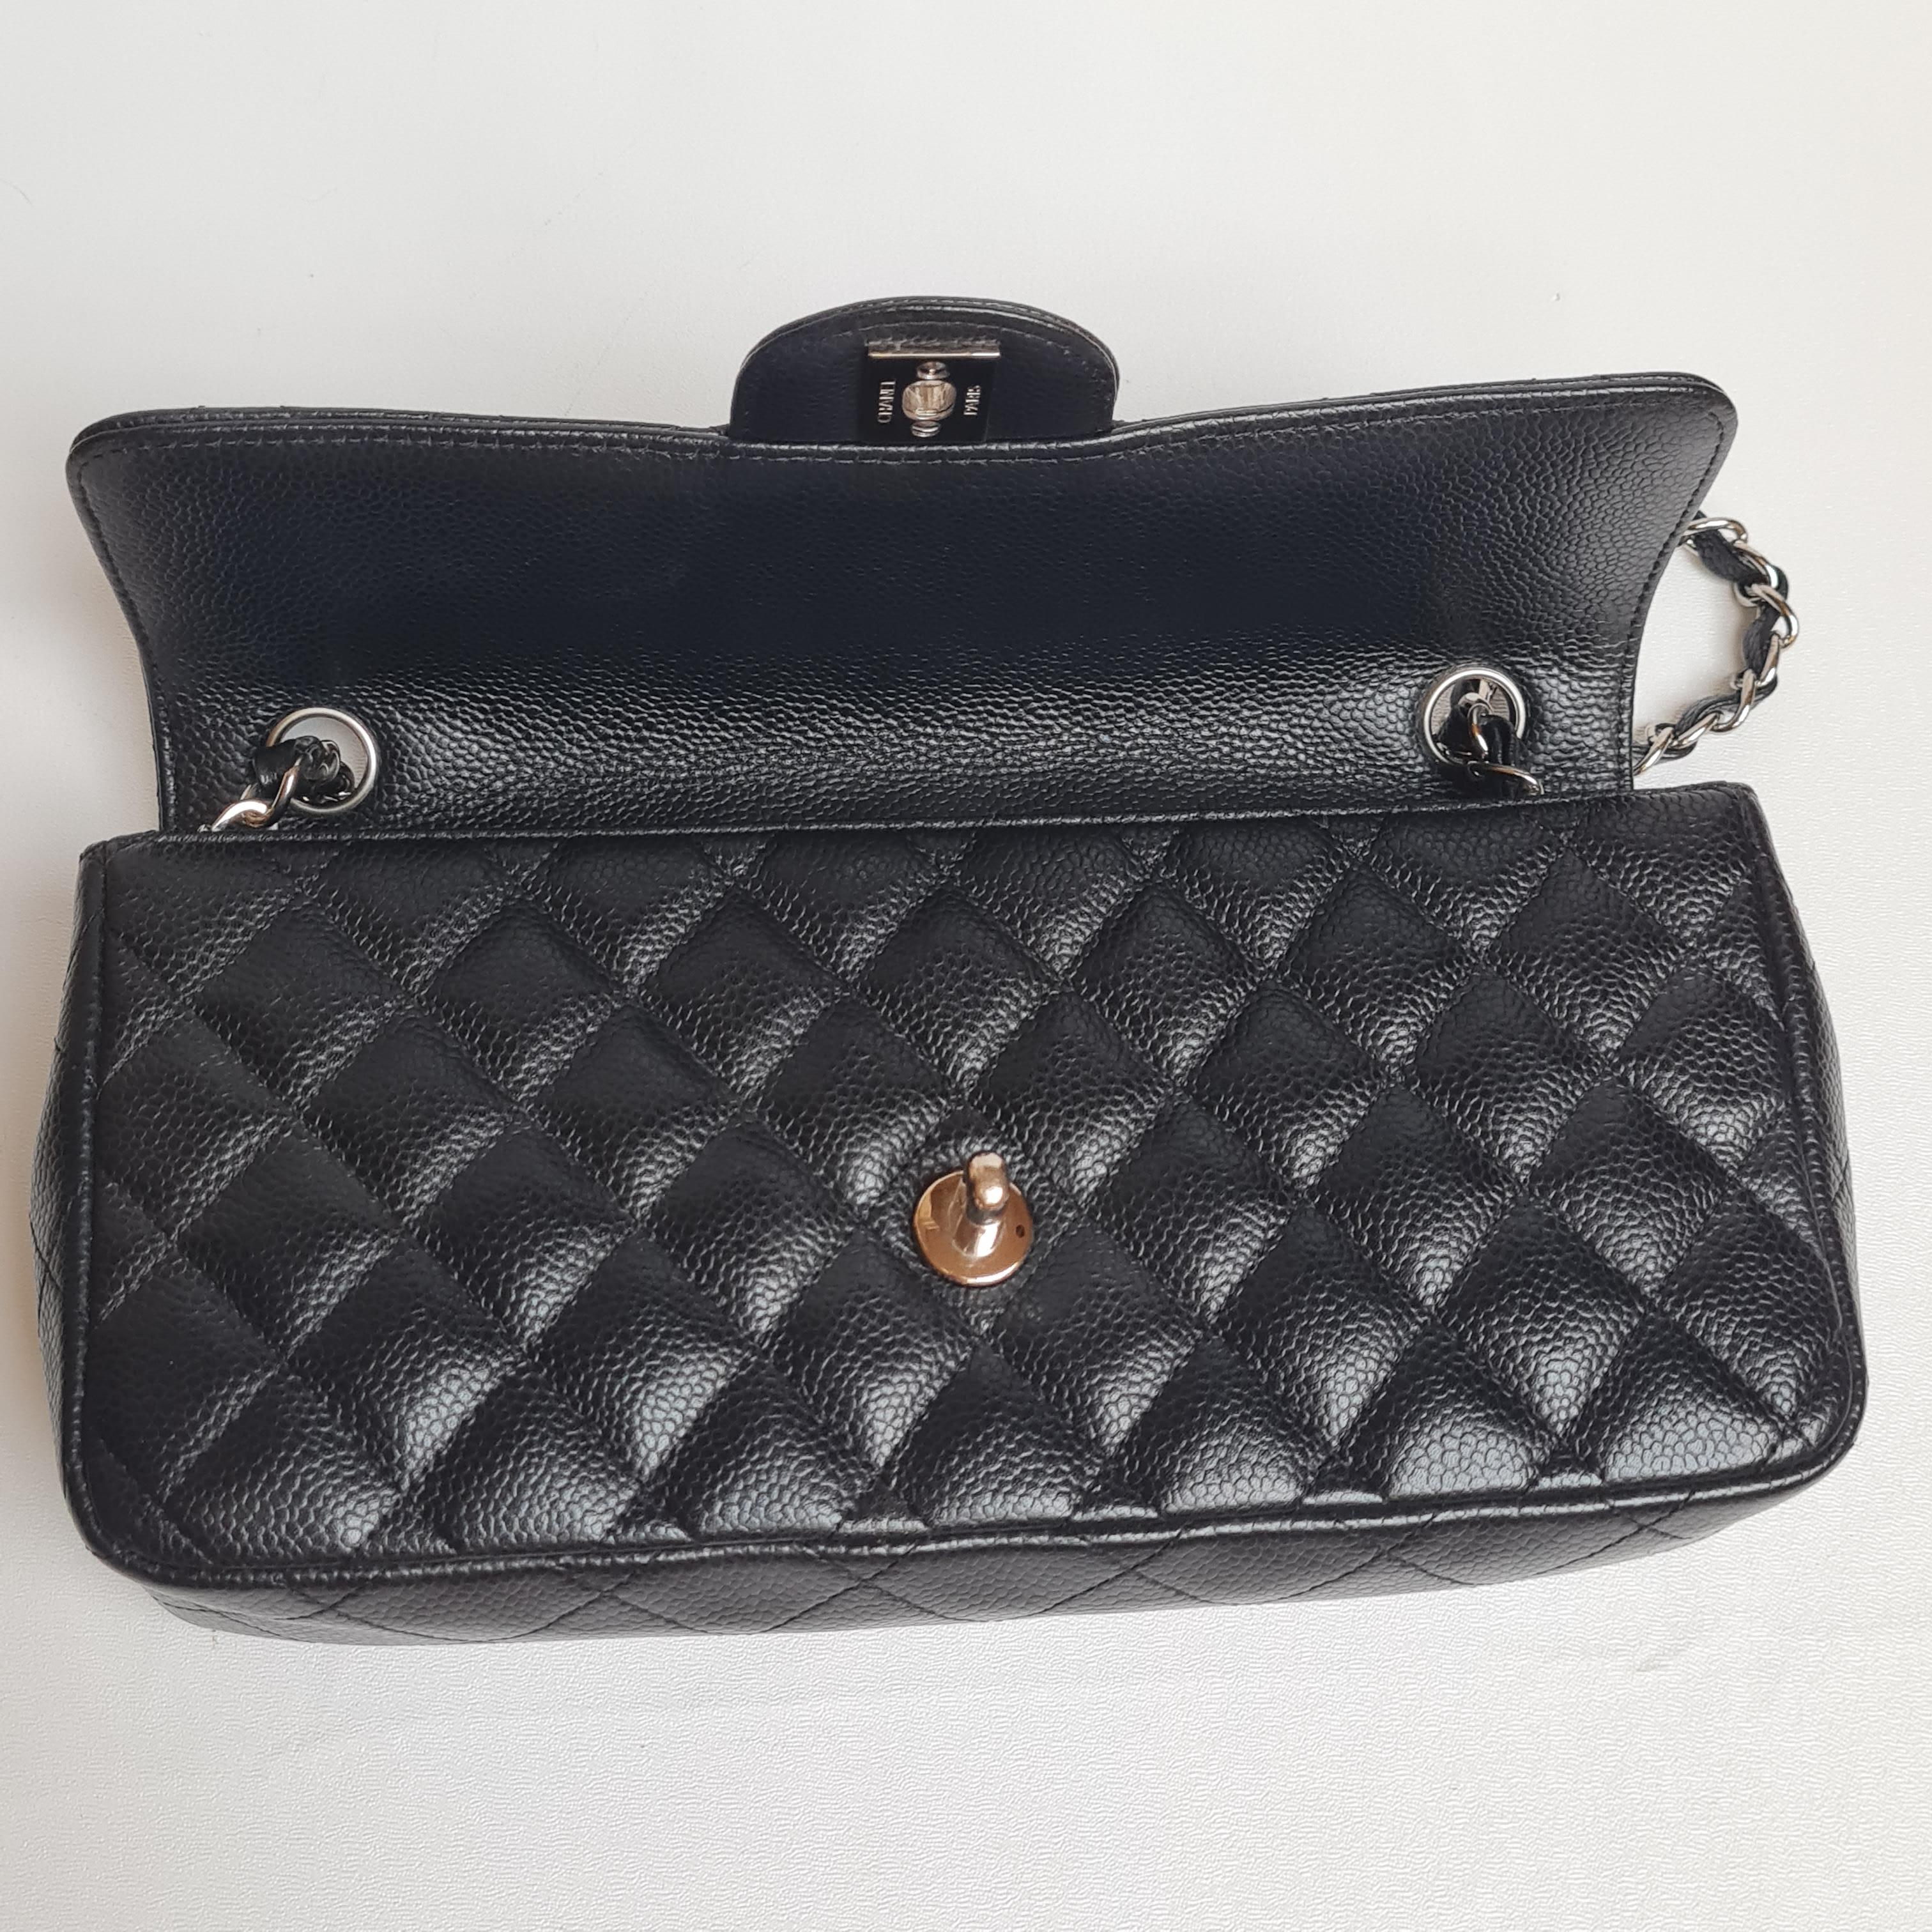 Chanel Black Caviar Quilted East West SHW Flap Bag 7